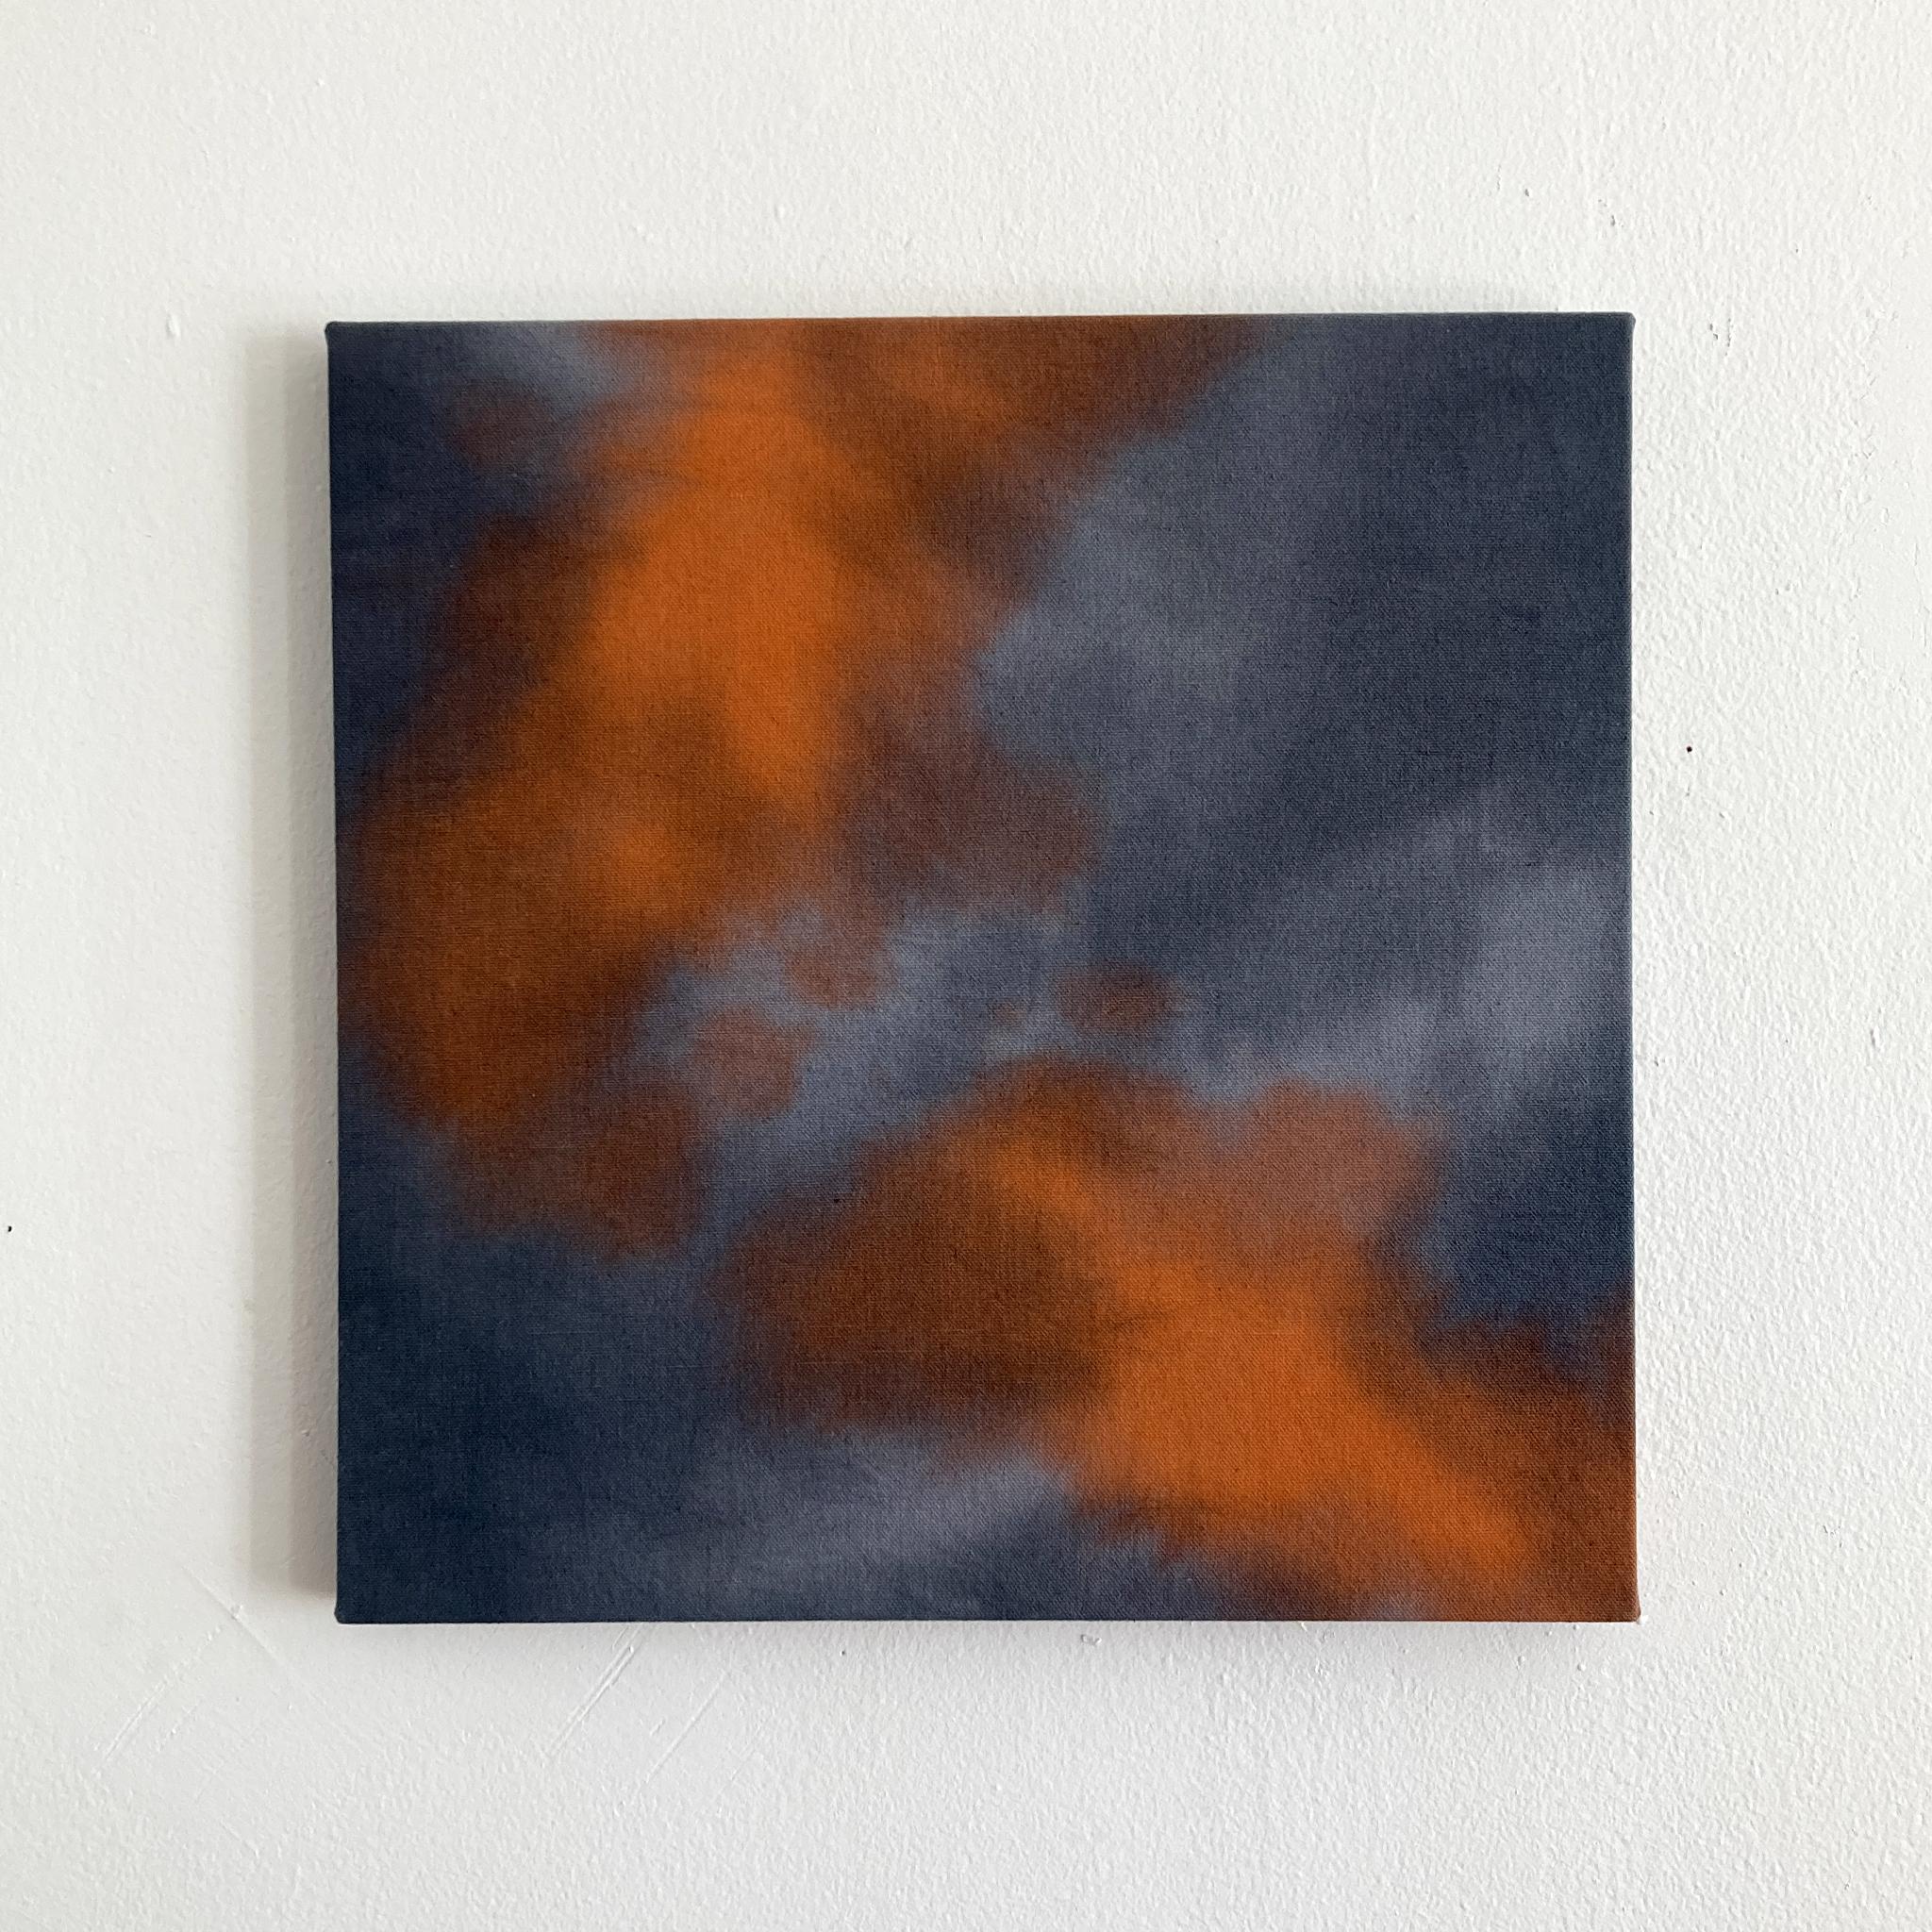 An ethereal abstract painting, created in our NYC studio. This 16 x 16 inch canvas is a place for the eye to wander. Navy, slate gray, and persimmon orange create a calming yet vibrant piece.

This series of paintings is an extension of my